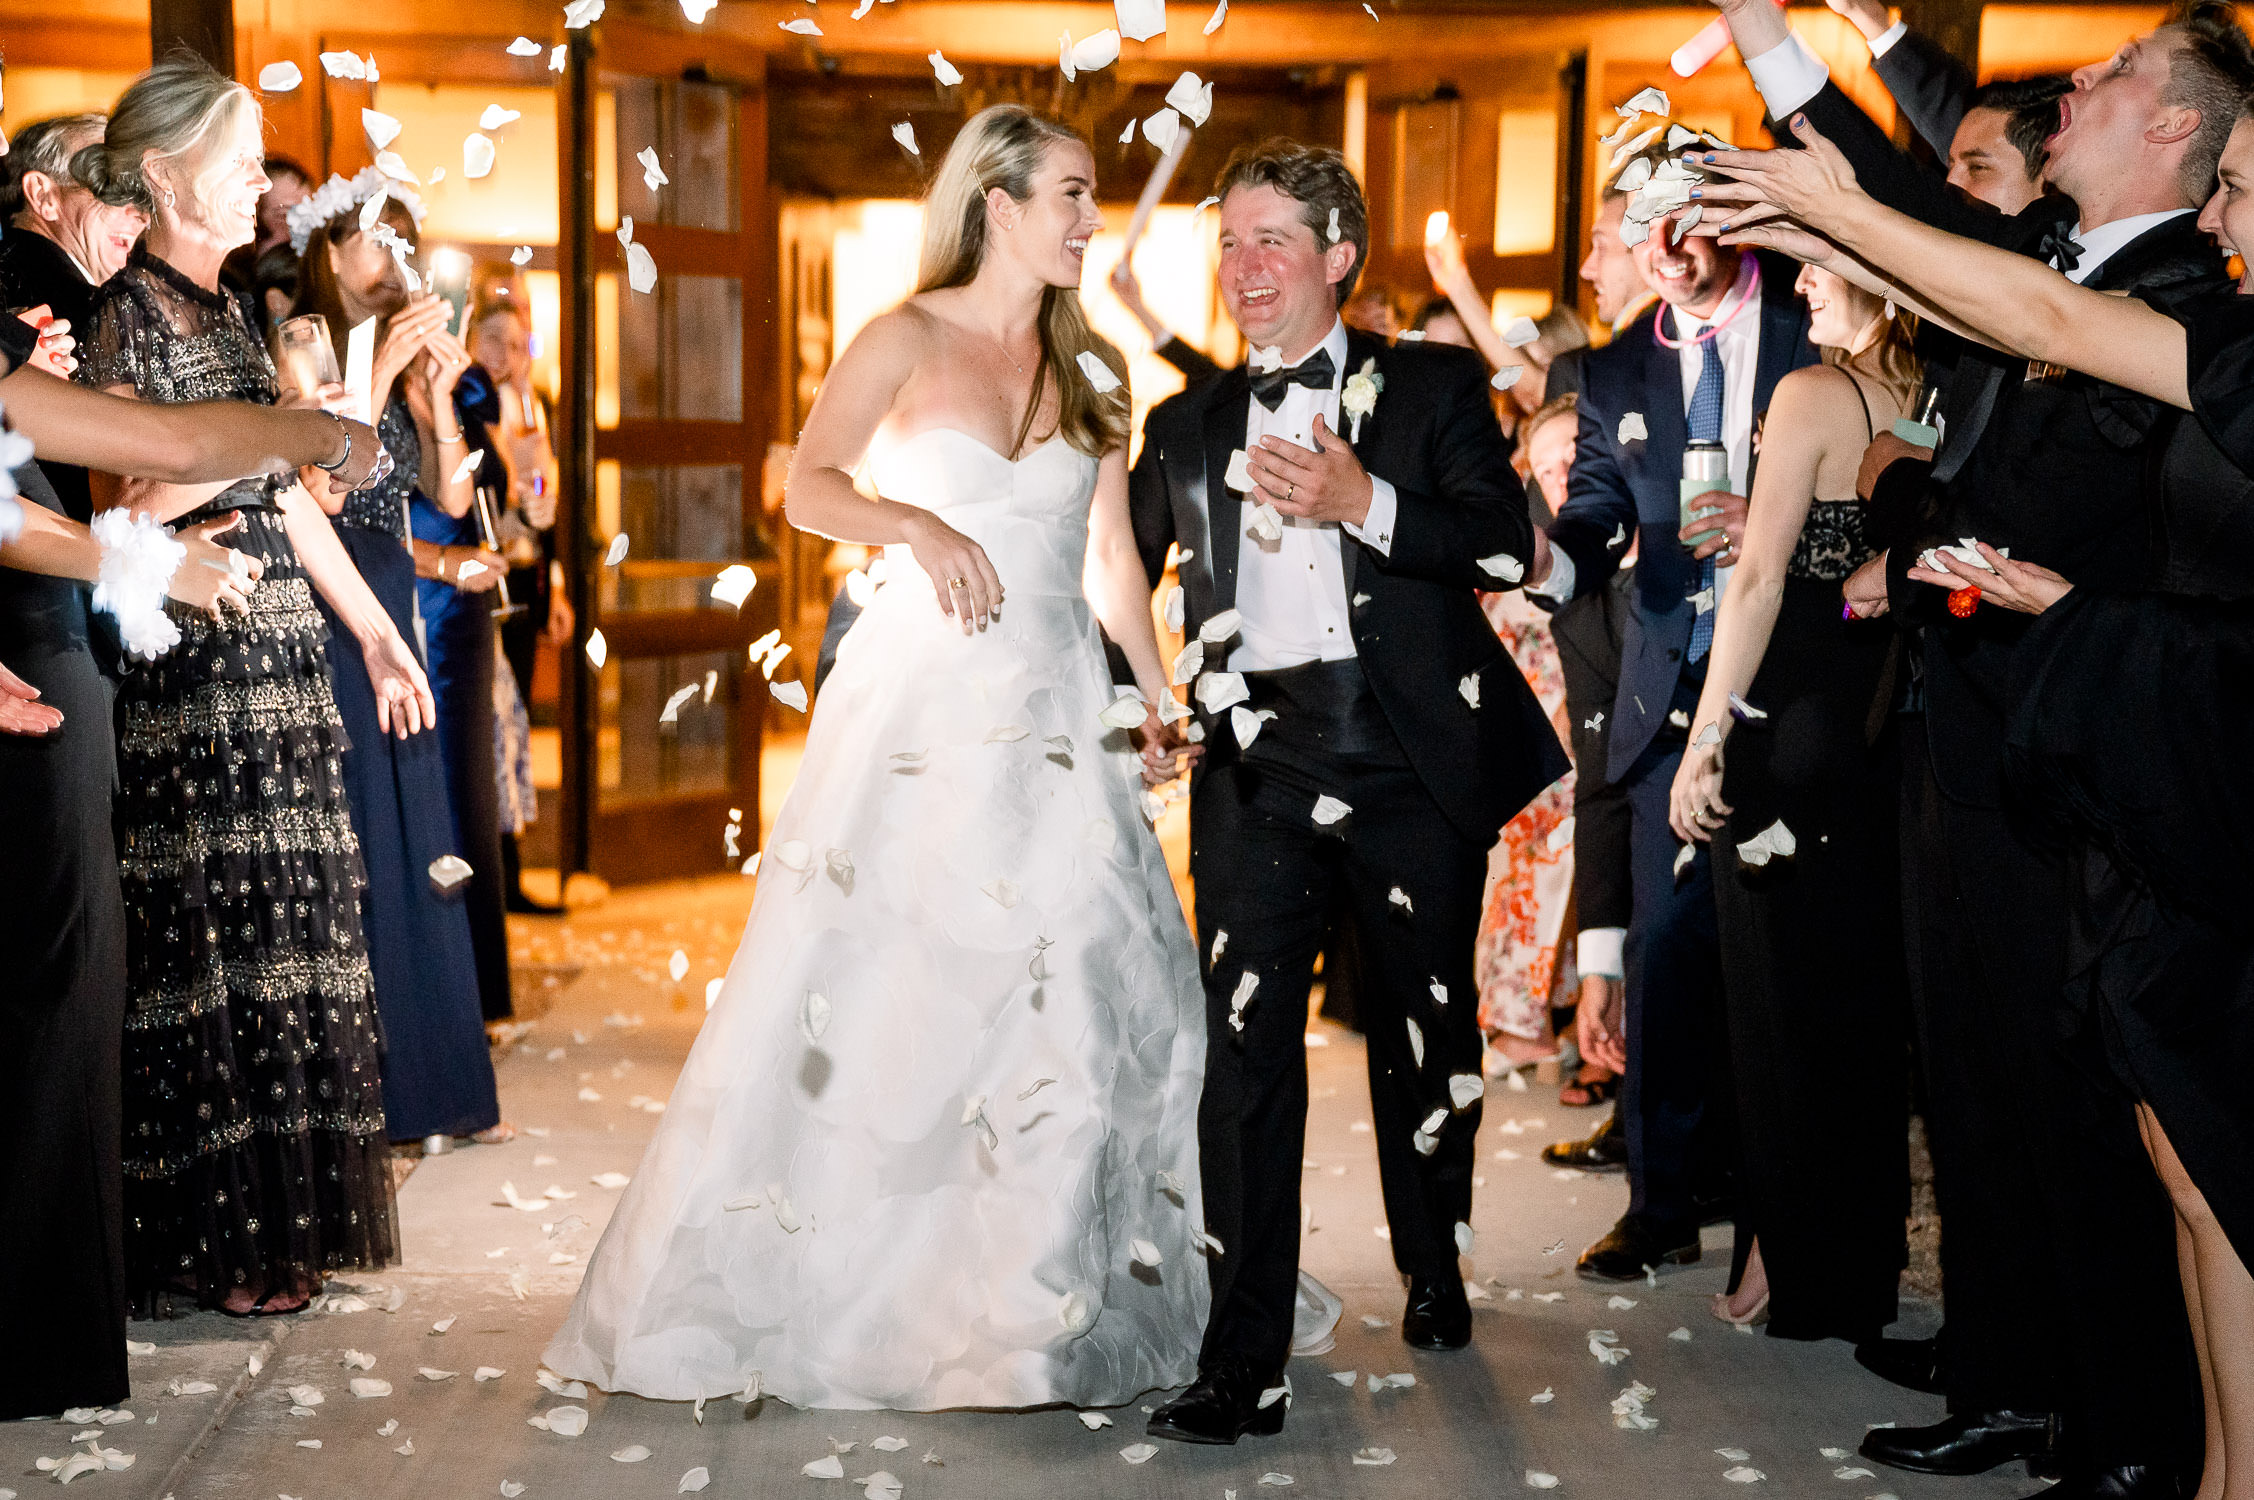 Bride and groom exit bishop's lodge with white rose petals thrown at them.